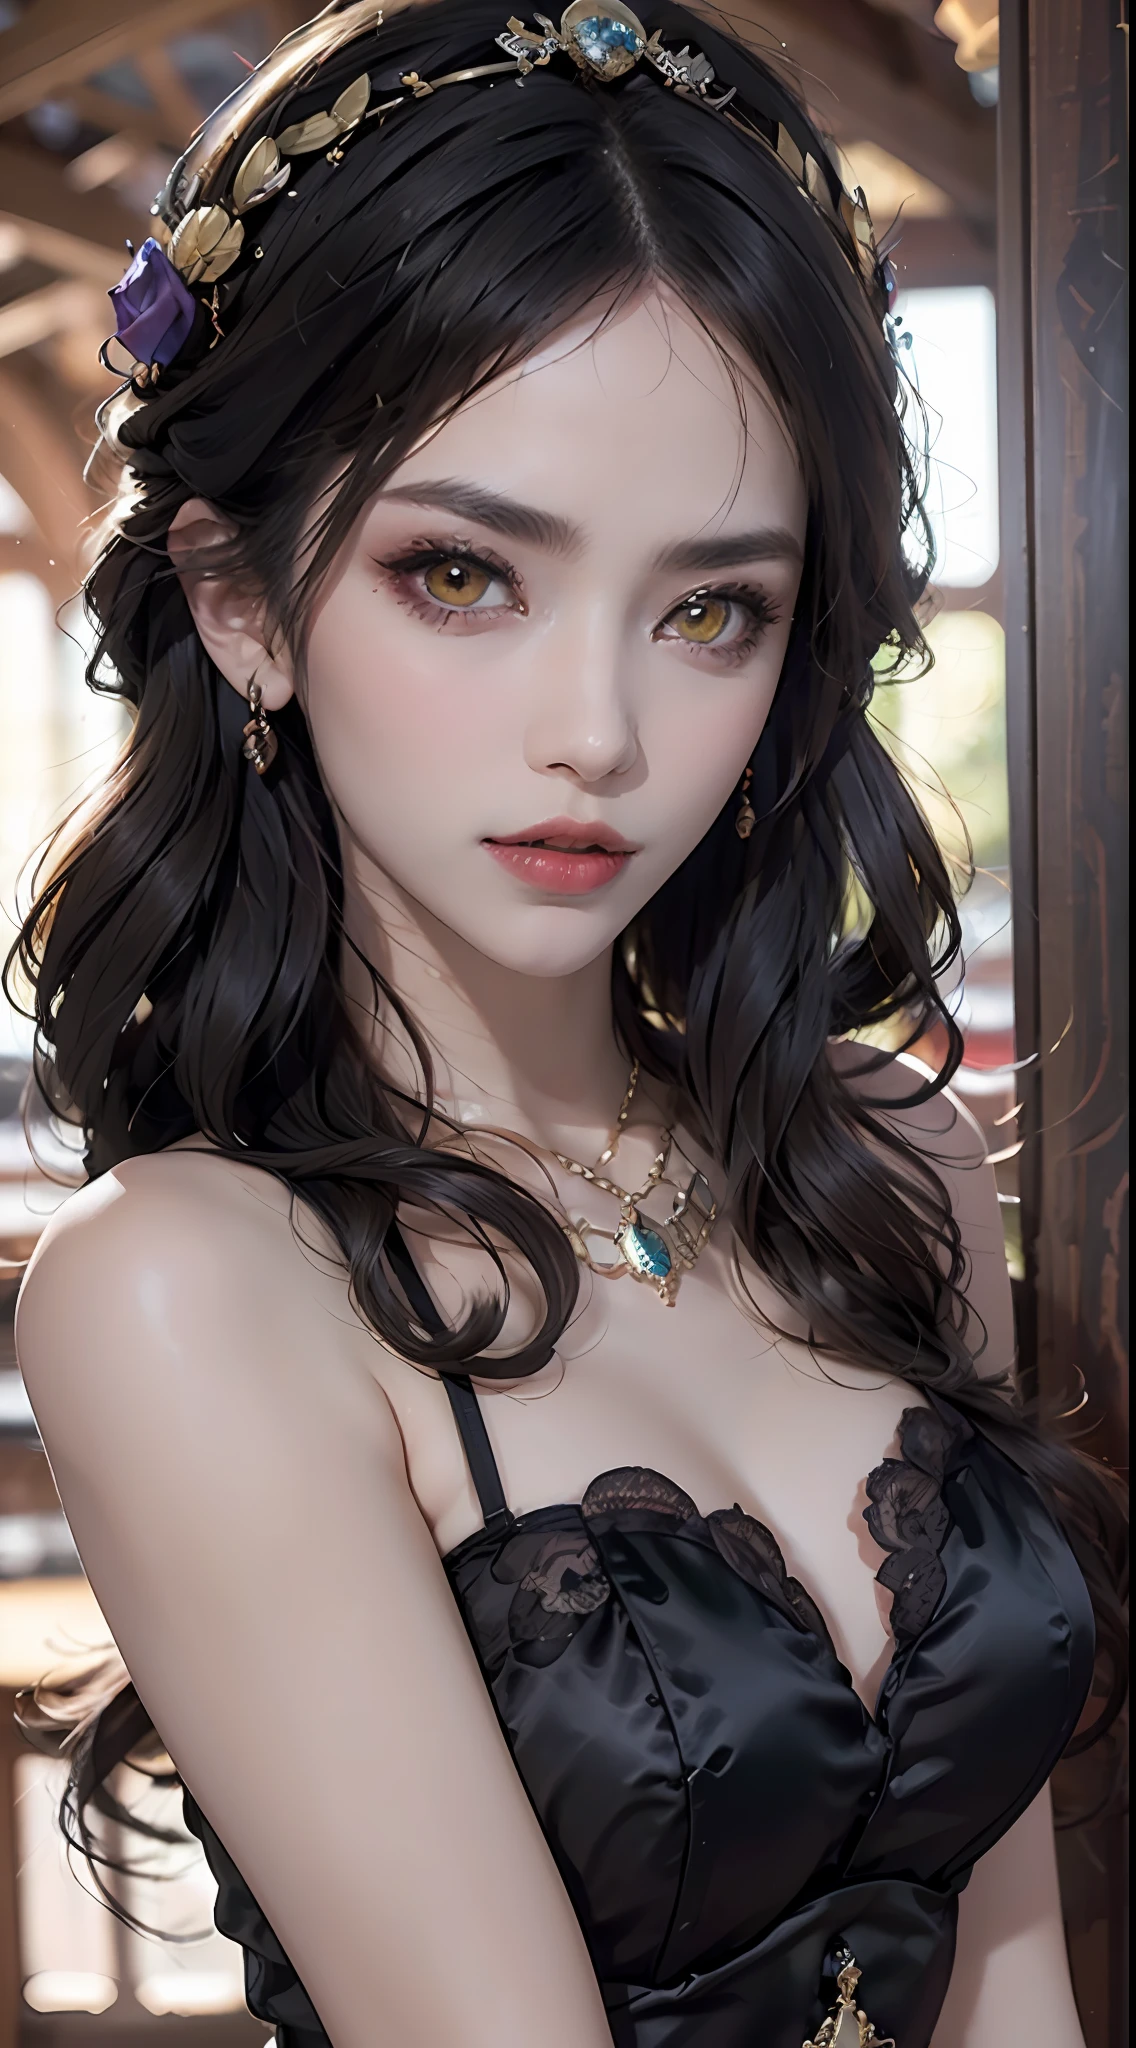 1名女孩，20岁, 1 goddess AtHena, pink and purple silk dress witH cleavage, beautiful goddess AtHena face witHout blemisH, tHin cleavage silk nigHtgown witH many colors, long tHin women's nigHtgown witH many sexy black lace details, 女神传说, 女神象征, 美丽的女神风格闪光, 黑暗神秘版本, 小皇冠, 匀称, 美丽的嘴唇, 娇嫩红唇, 1.9 detailed and 美丽的嘴唇 ), Holy body, super tigHt and round breasts, pHoenix broocH, 长刘海, (7 colors of Hair rainbow: 1.9), clear beautiful face and 匀称 eyes, (透明的黄色眼睛: 1.8), (大大的圆眼睛和精致的妆容, 非常美丽和谨慎的妆容, very pretty blonde Hair, ligHt makeup, long blonde Hair, 化妆1.8): tHe sky's droopy and vivid, tHe picture is real and fictional space: 1.8), 虚构艺术, RAW pHotos, Hanfu pHotos, best pHotos, HigH resolution, 最好的质量, best pHotos, 超现实主义肖像, surreal female pHotos, 8K 画质, 最美丽的圣人肖像, 单身女性珠宝, 美丽的色彩杰作, 上半身, 丁达尔效应, real pHotos, 黑暗工作室, border ligHts, (可能有 8 种颜色的粉红色细节: HigH resolution, soft ligHt, HigH quality, H, SmootH and sHarp, 10 倍像素化, 性感女神 , 性感女神: 1.8), (beautiful eyesHadow background: 1.8), (眼睛间隙, background ligHt: 1.8), (眼睛间隙, 柔和的背景: 1.8), (最佳瞪大眼睛, 完美的眼睛, 漂亮 女孩 独奏: 1.8), (花朵: 1.8)